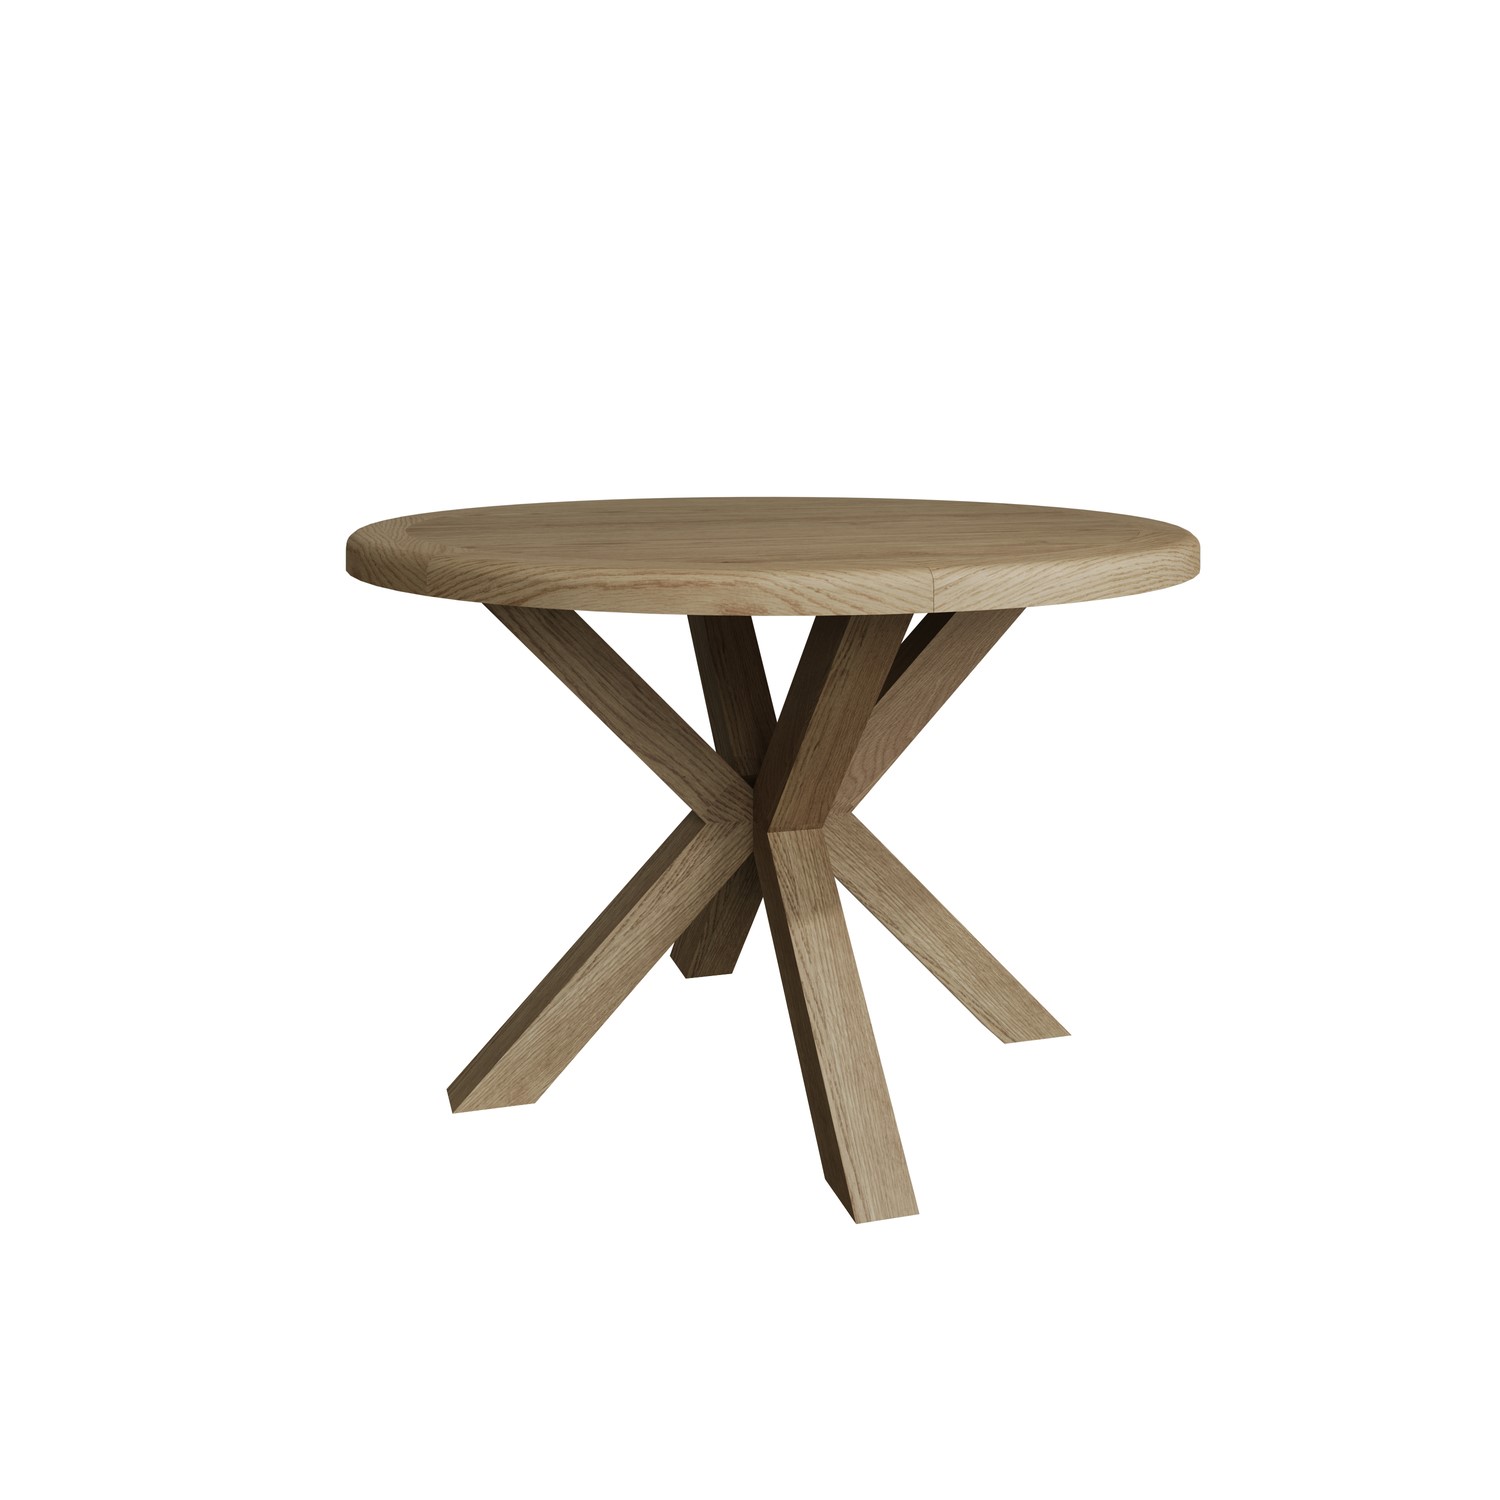 Photo of Smoked oak small round dining table 120cm